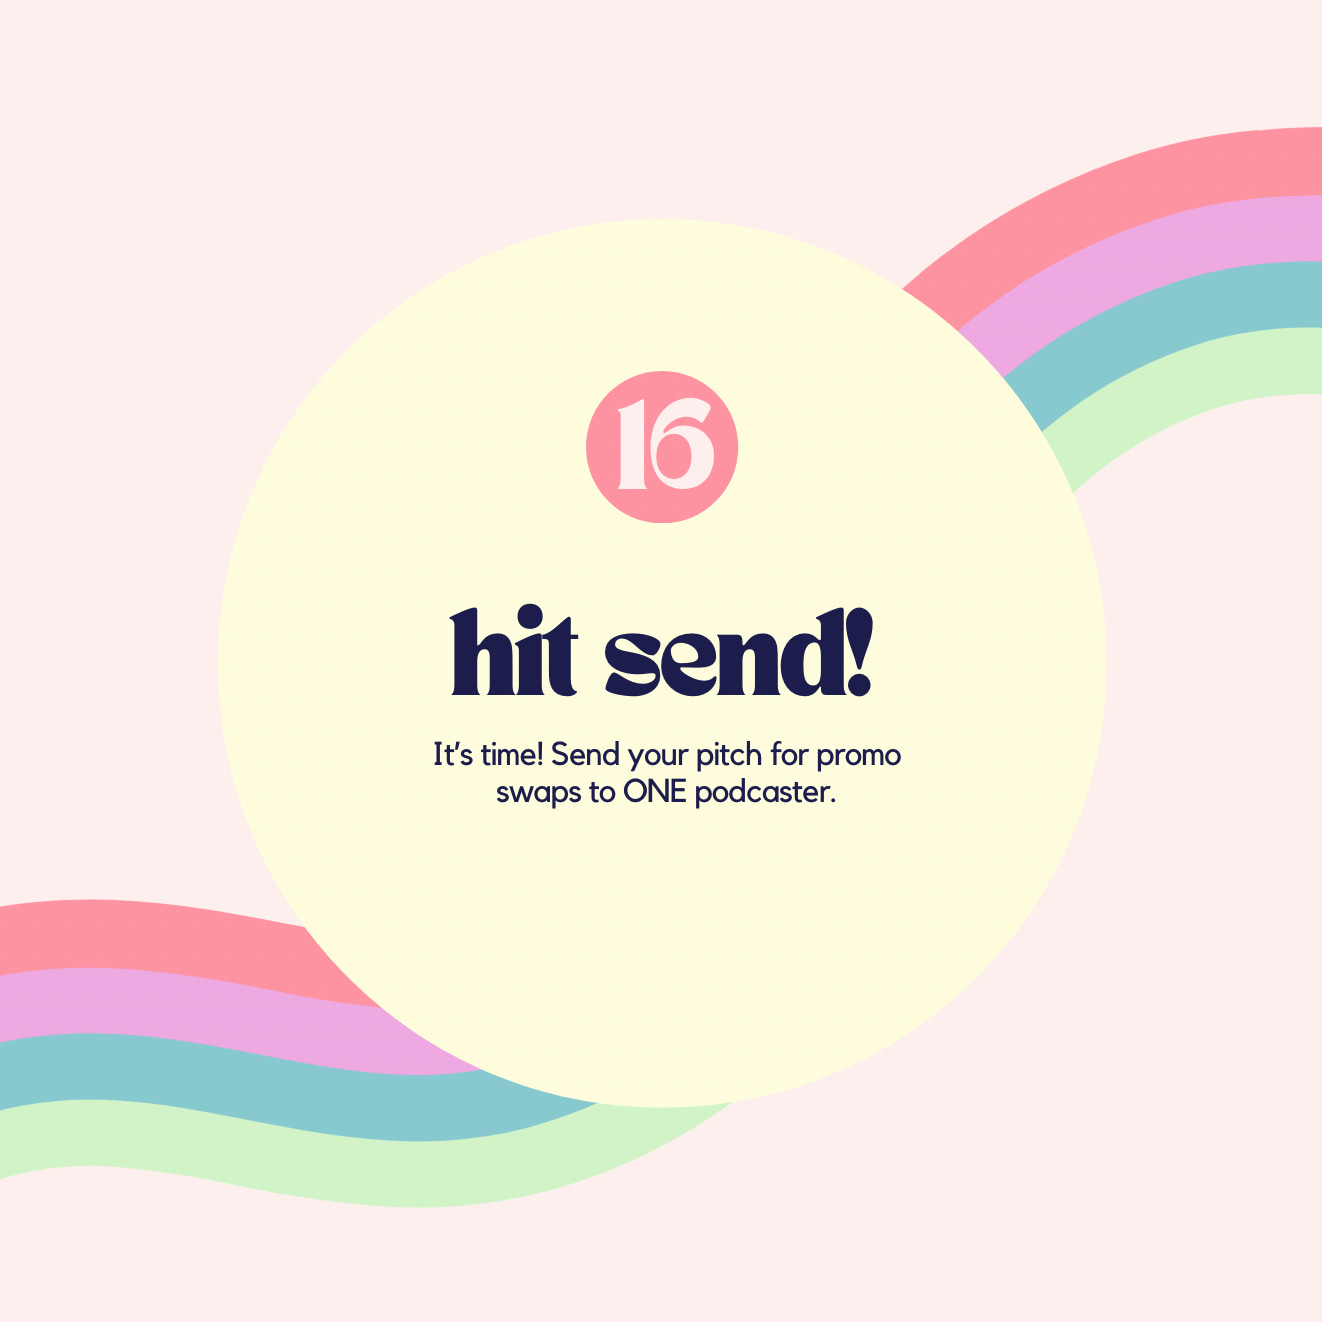 Hit send! It’s time! Send your pitch for promo swaps to ONE podcaster.